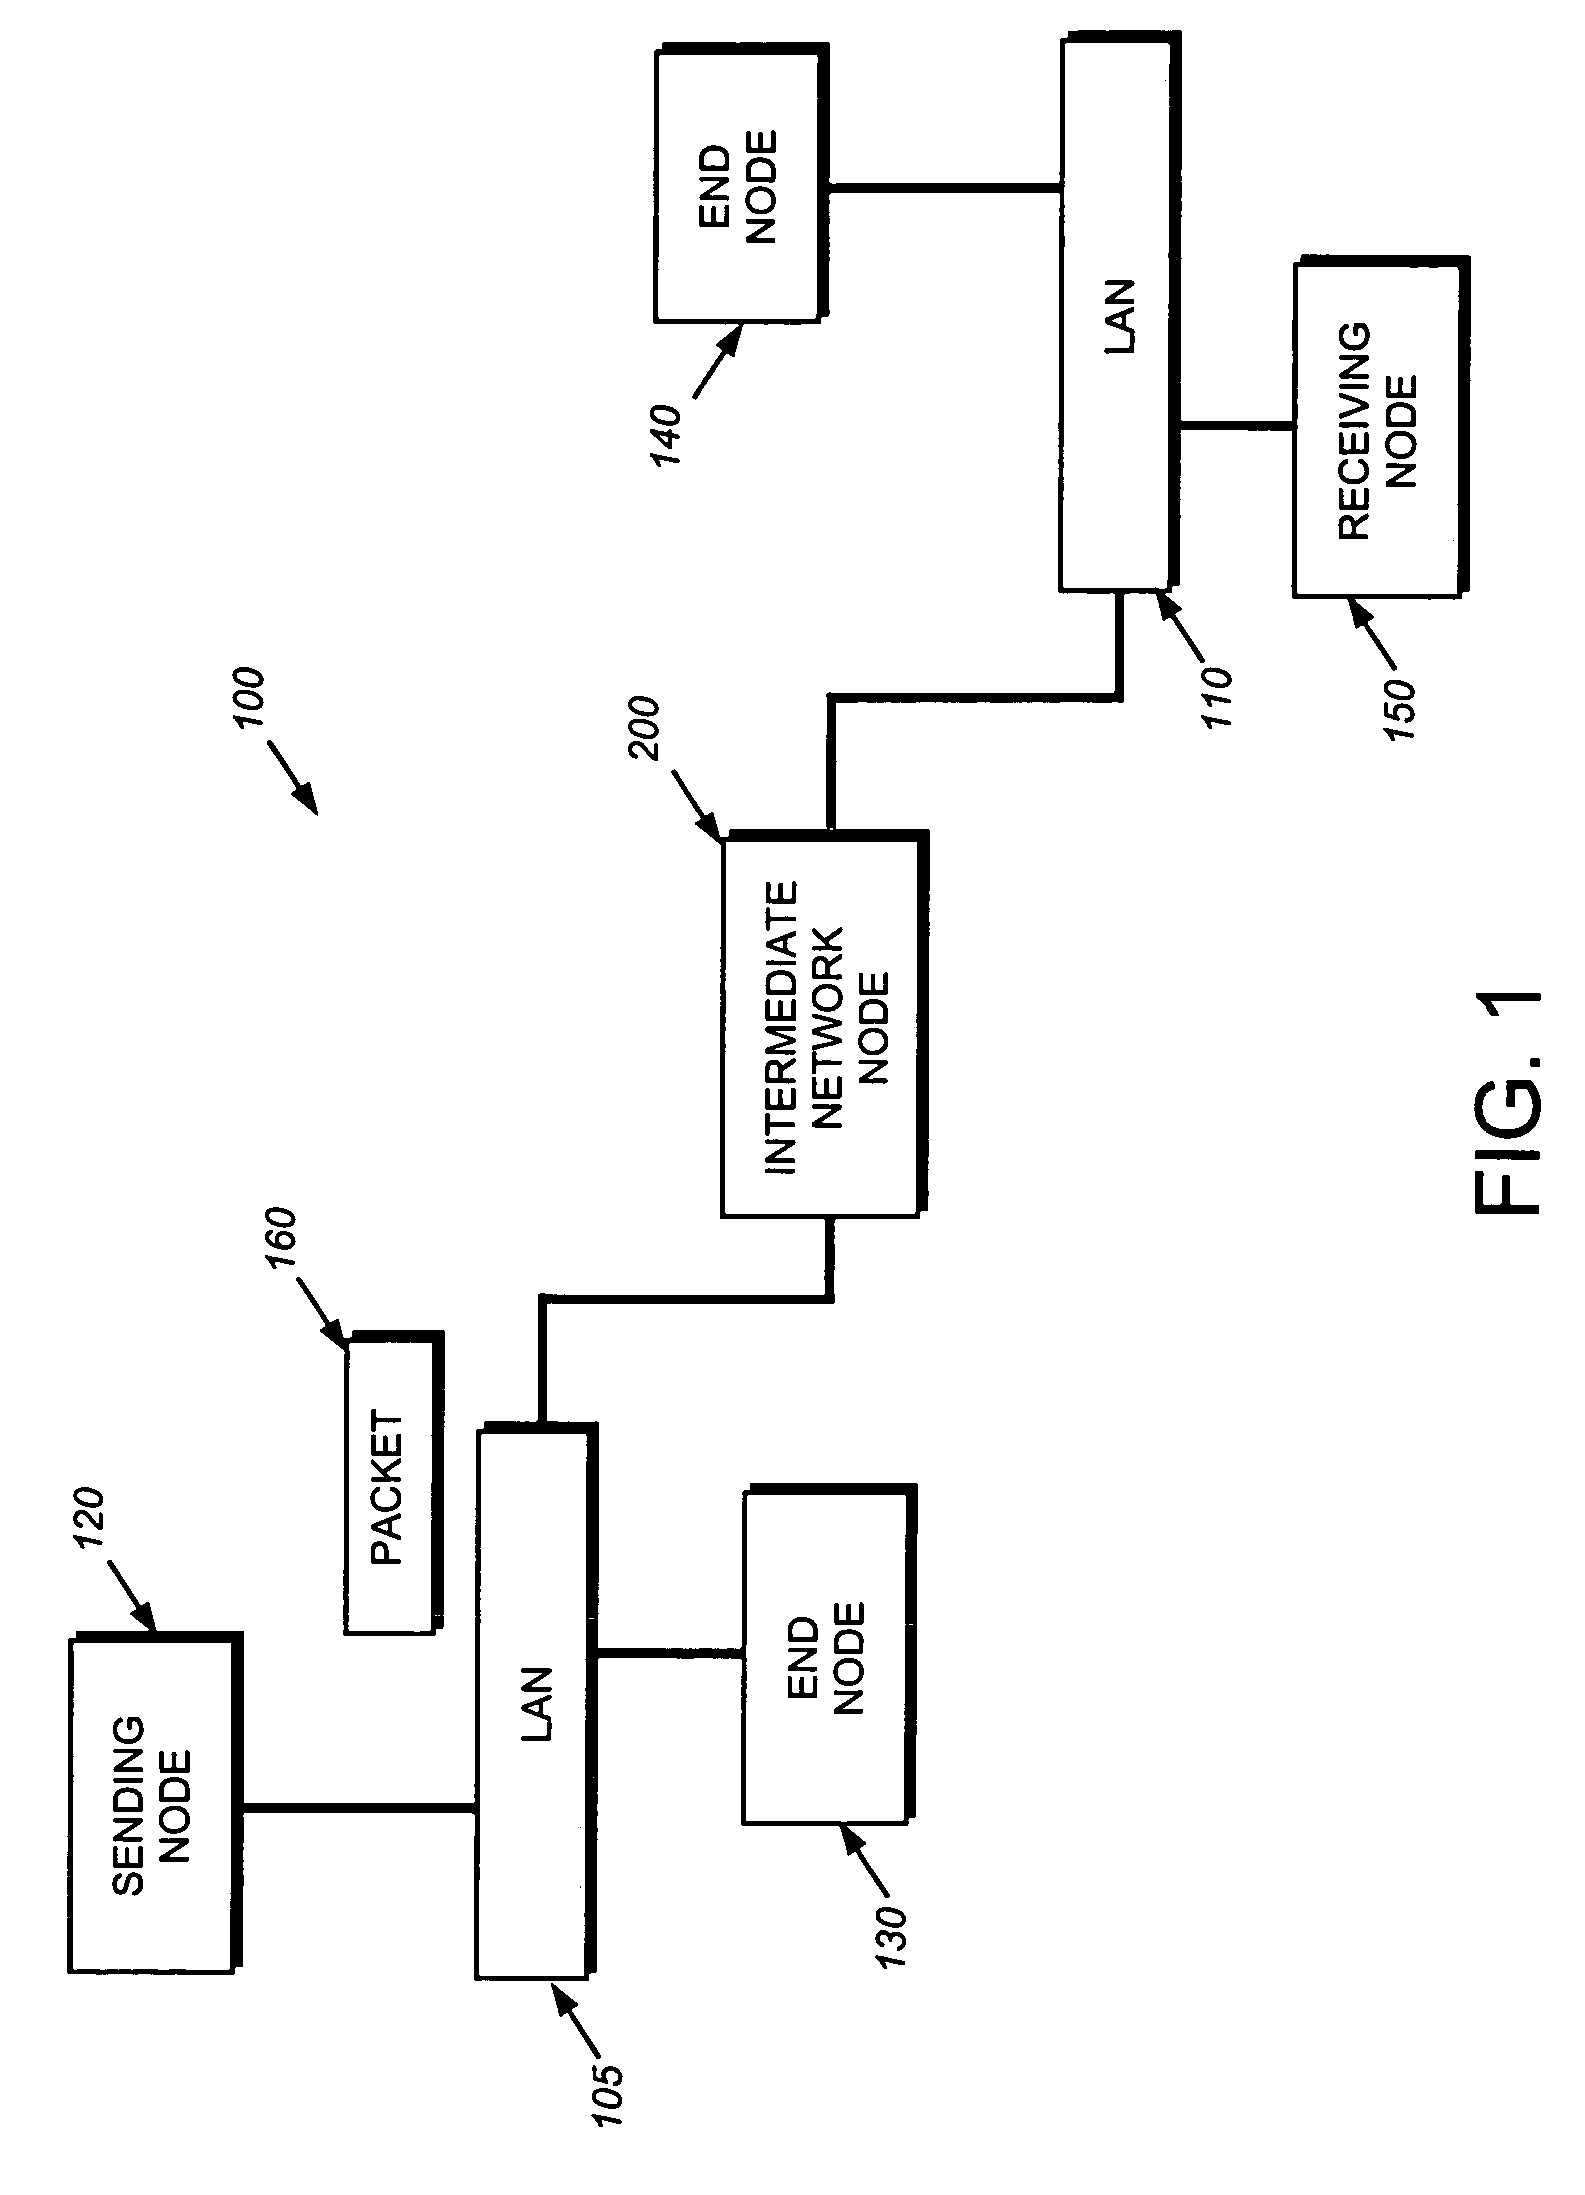 Hardware filtering support for denial-of-service attacks